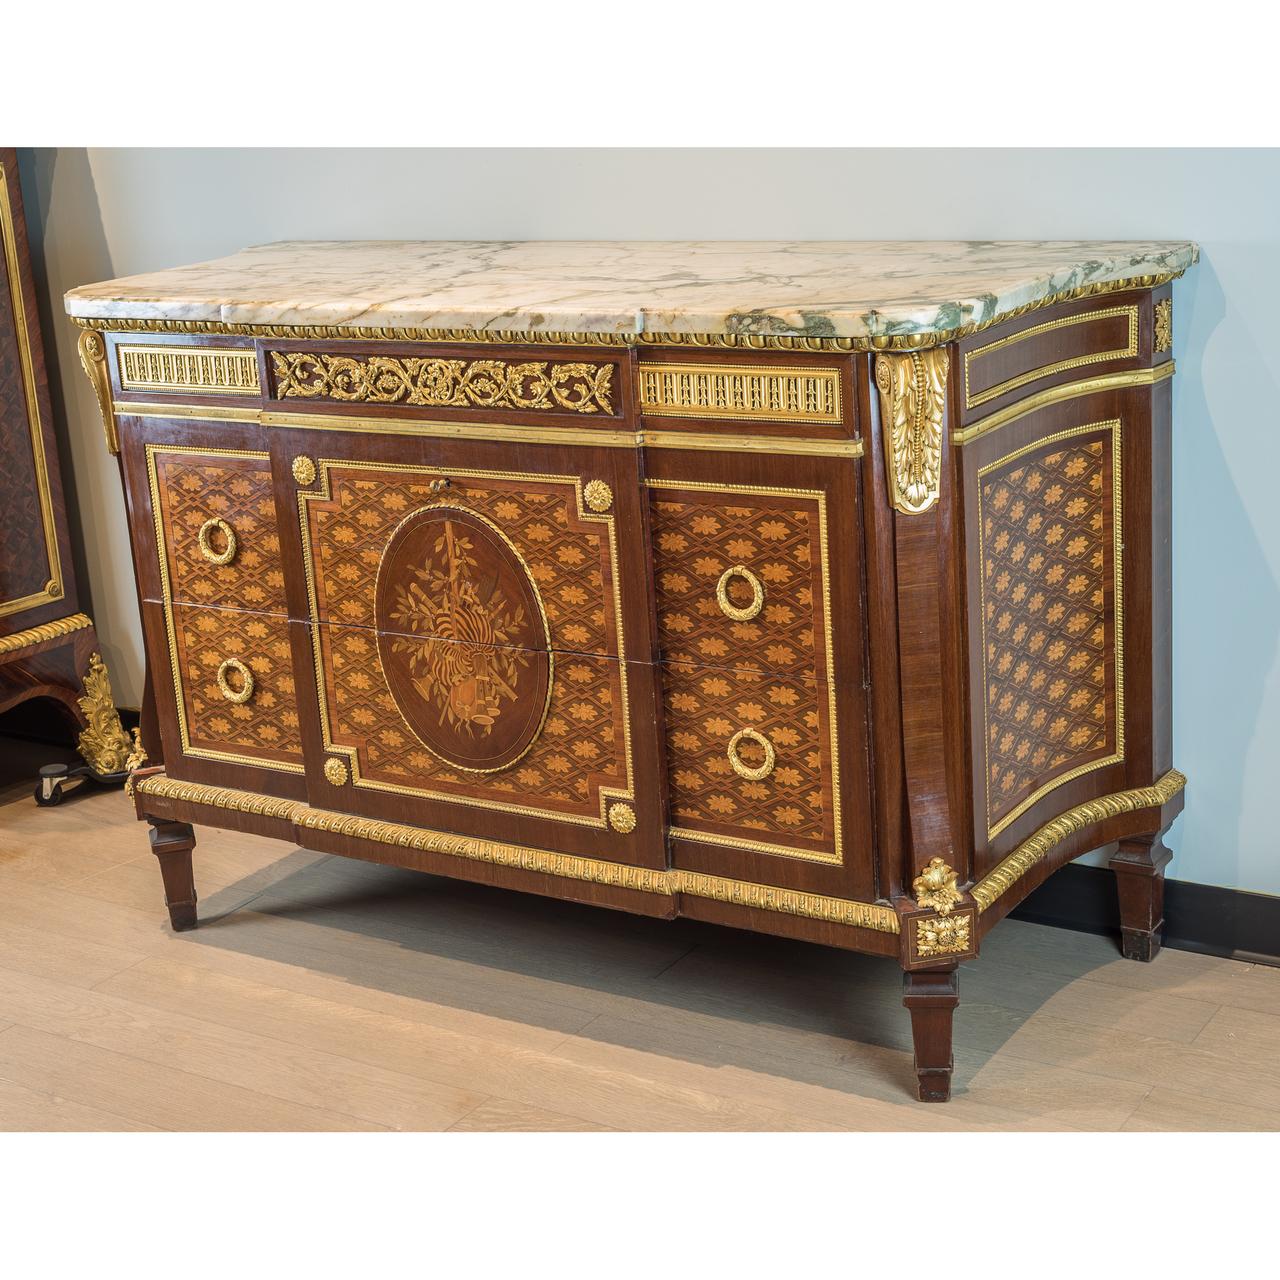 The breakfront shaped white and green marble-top, above a conforming case mahogany paneled front and sides beneath a guilloche and vitruvian scroll frieze. The front parquetry with two long drawers decorated ‘sans traverse’ with an oval reserve